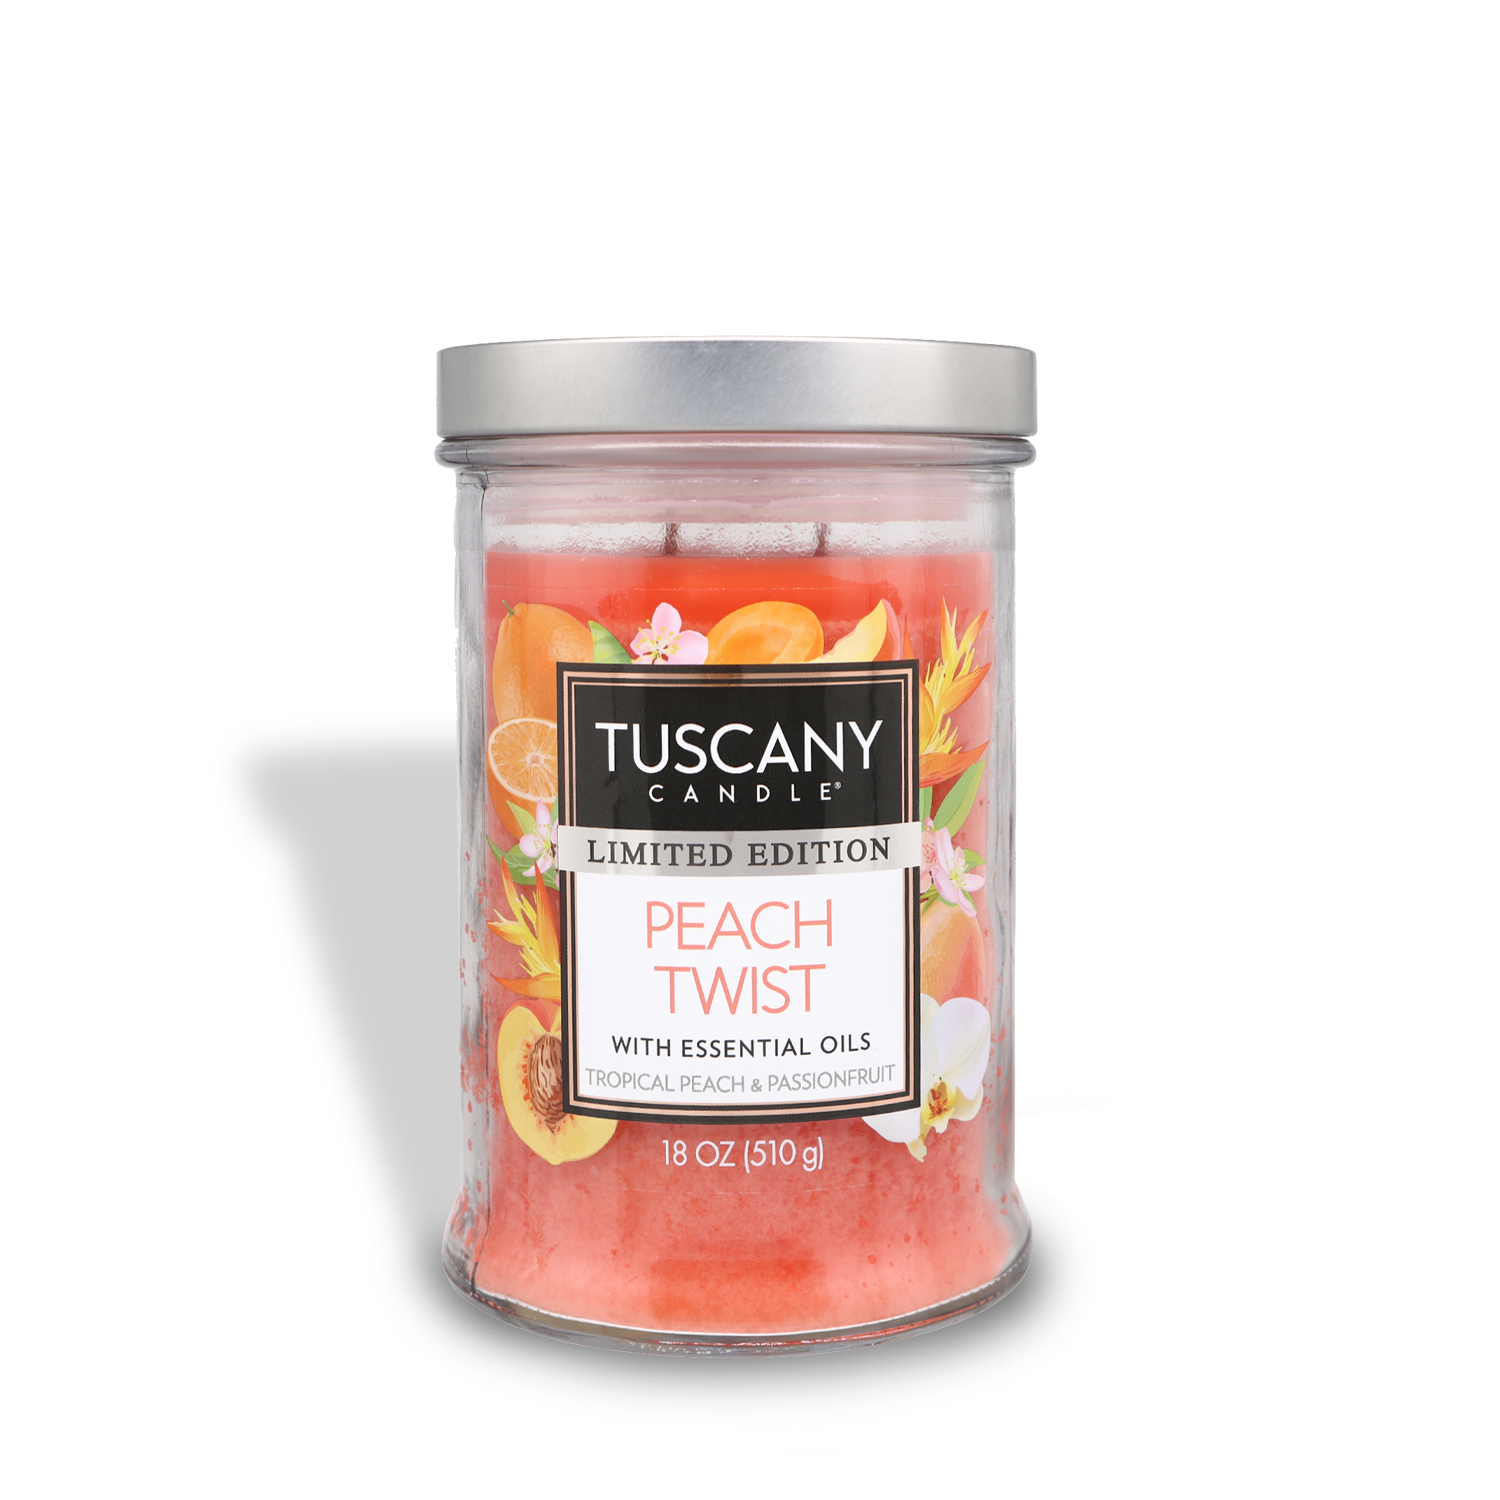 Enjoy the delightful aroma of Peach Twist Long-Lasting Scented Jar Candle (18 oz) with this Tuscany Candle® SEASONAL from the Summer Collection.